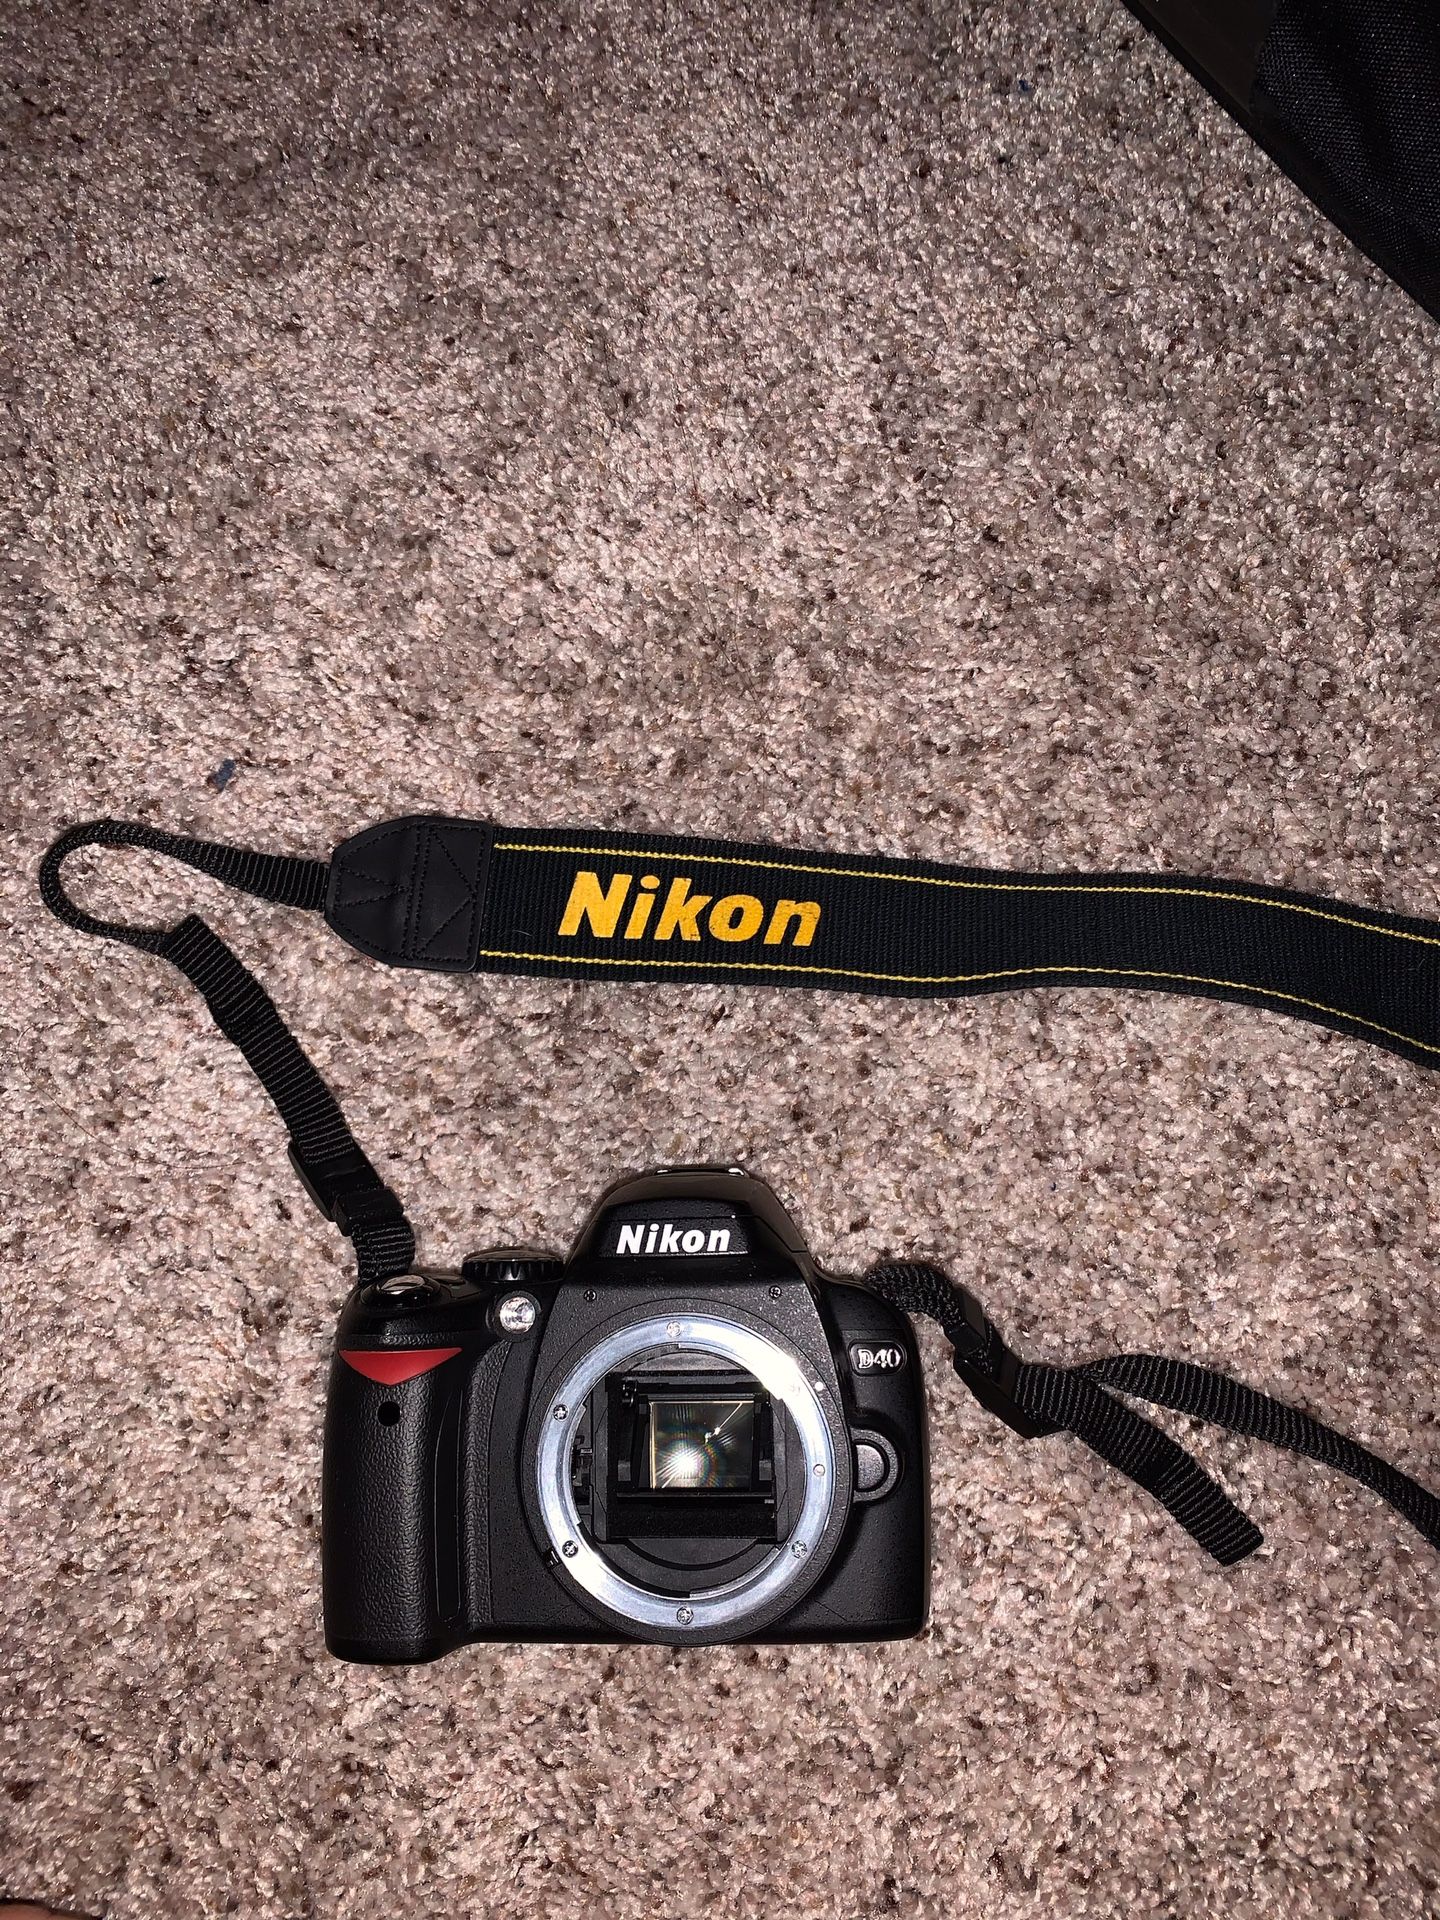 Nikon D40 with camera bag and everything needed